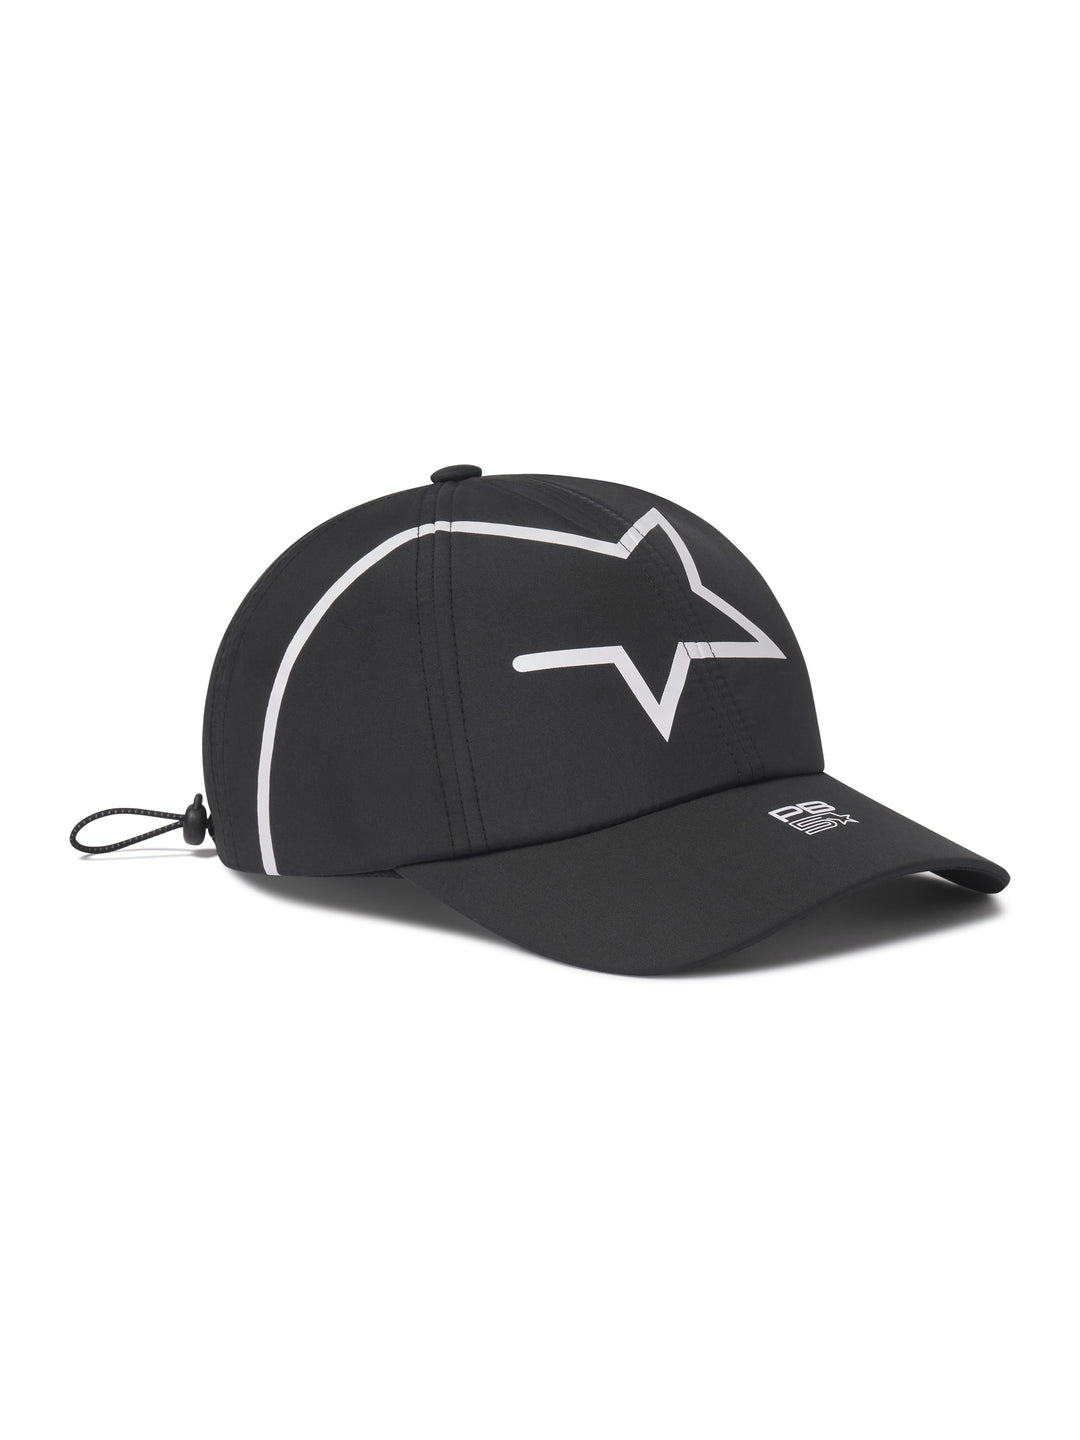 Stellar Cap side view in black with small logo on bill and large logo star on front of cap.